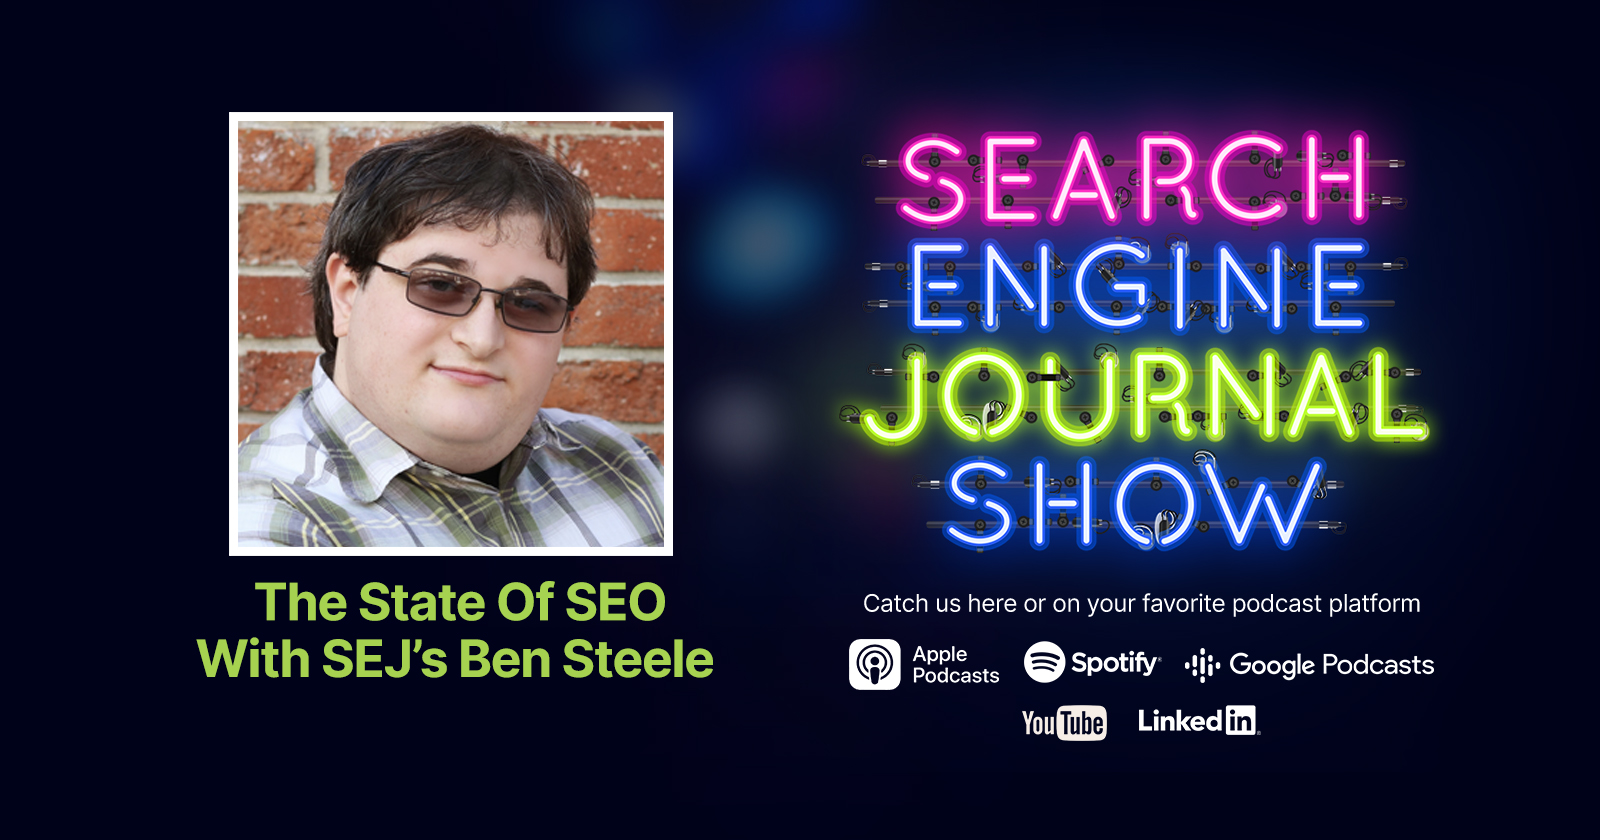 The State of SEO With SEJ's Ben Steele [Podcast]